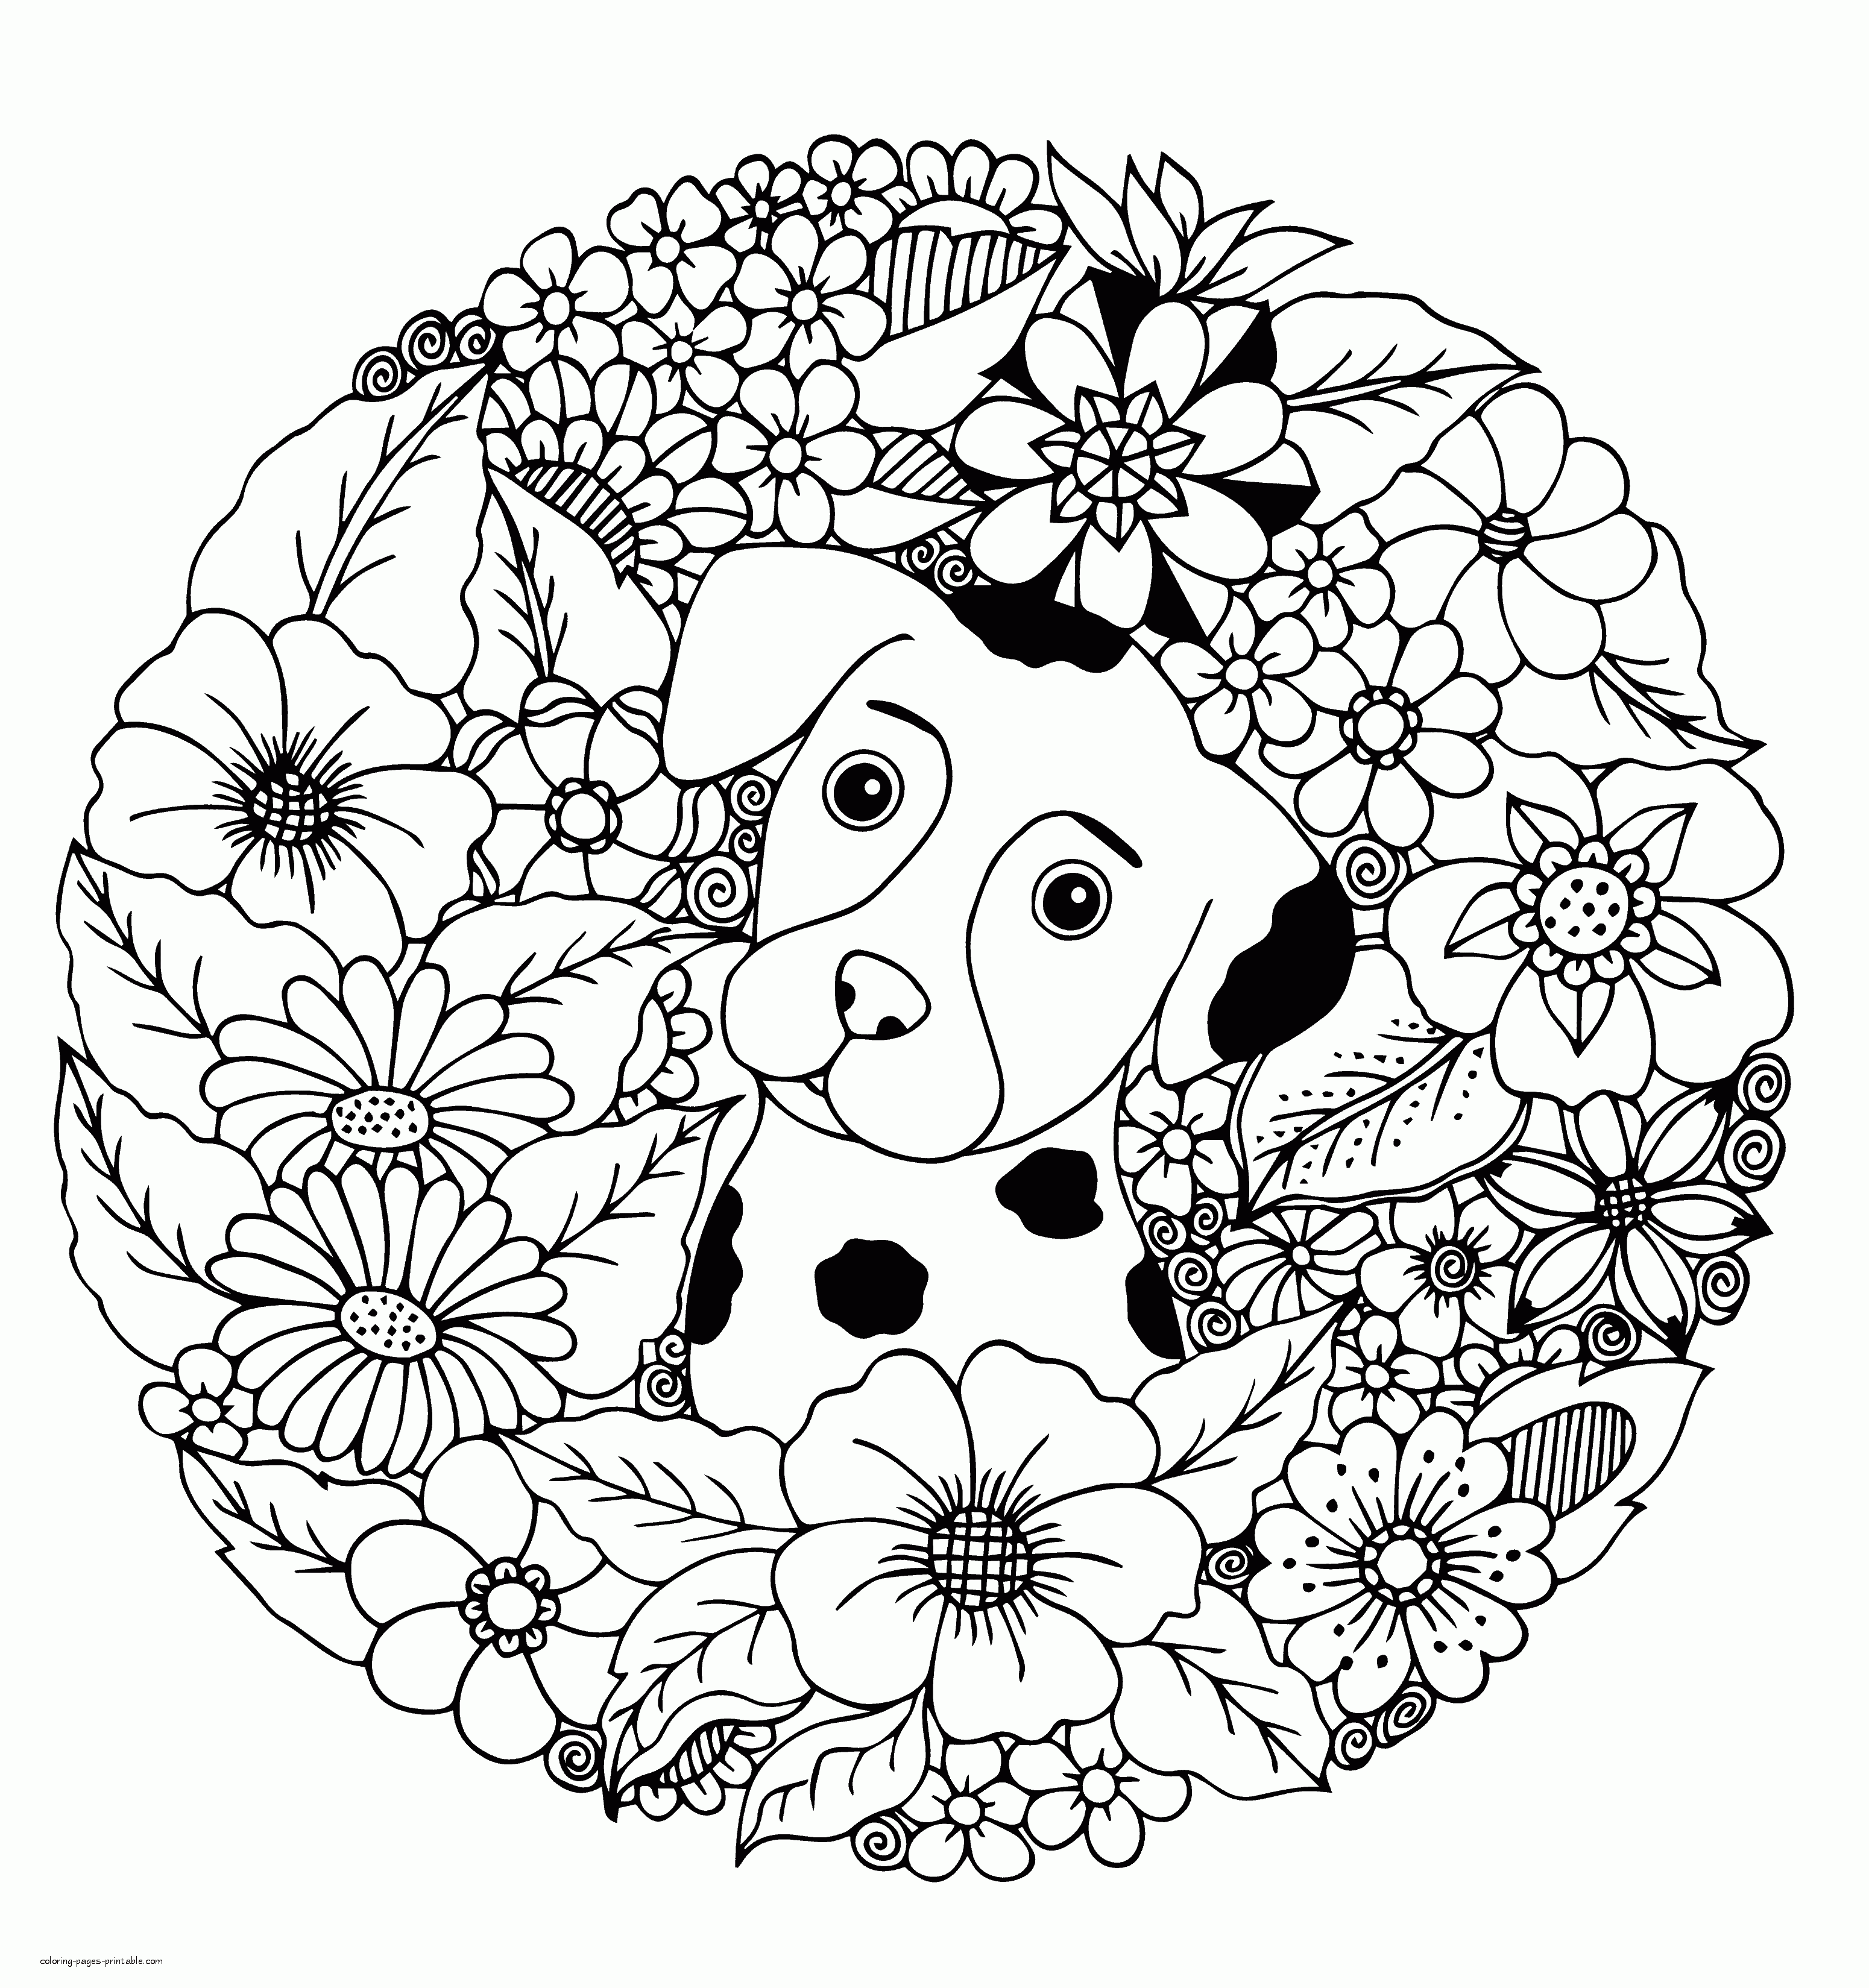 Puppy Coloring Pages For Adults || COLORING-PAGES-PRINTABLE.COM